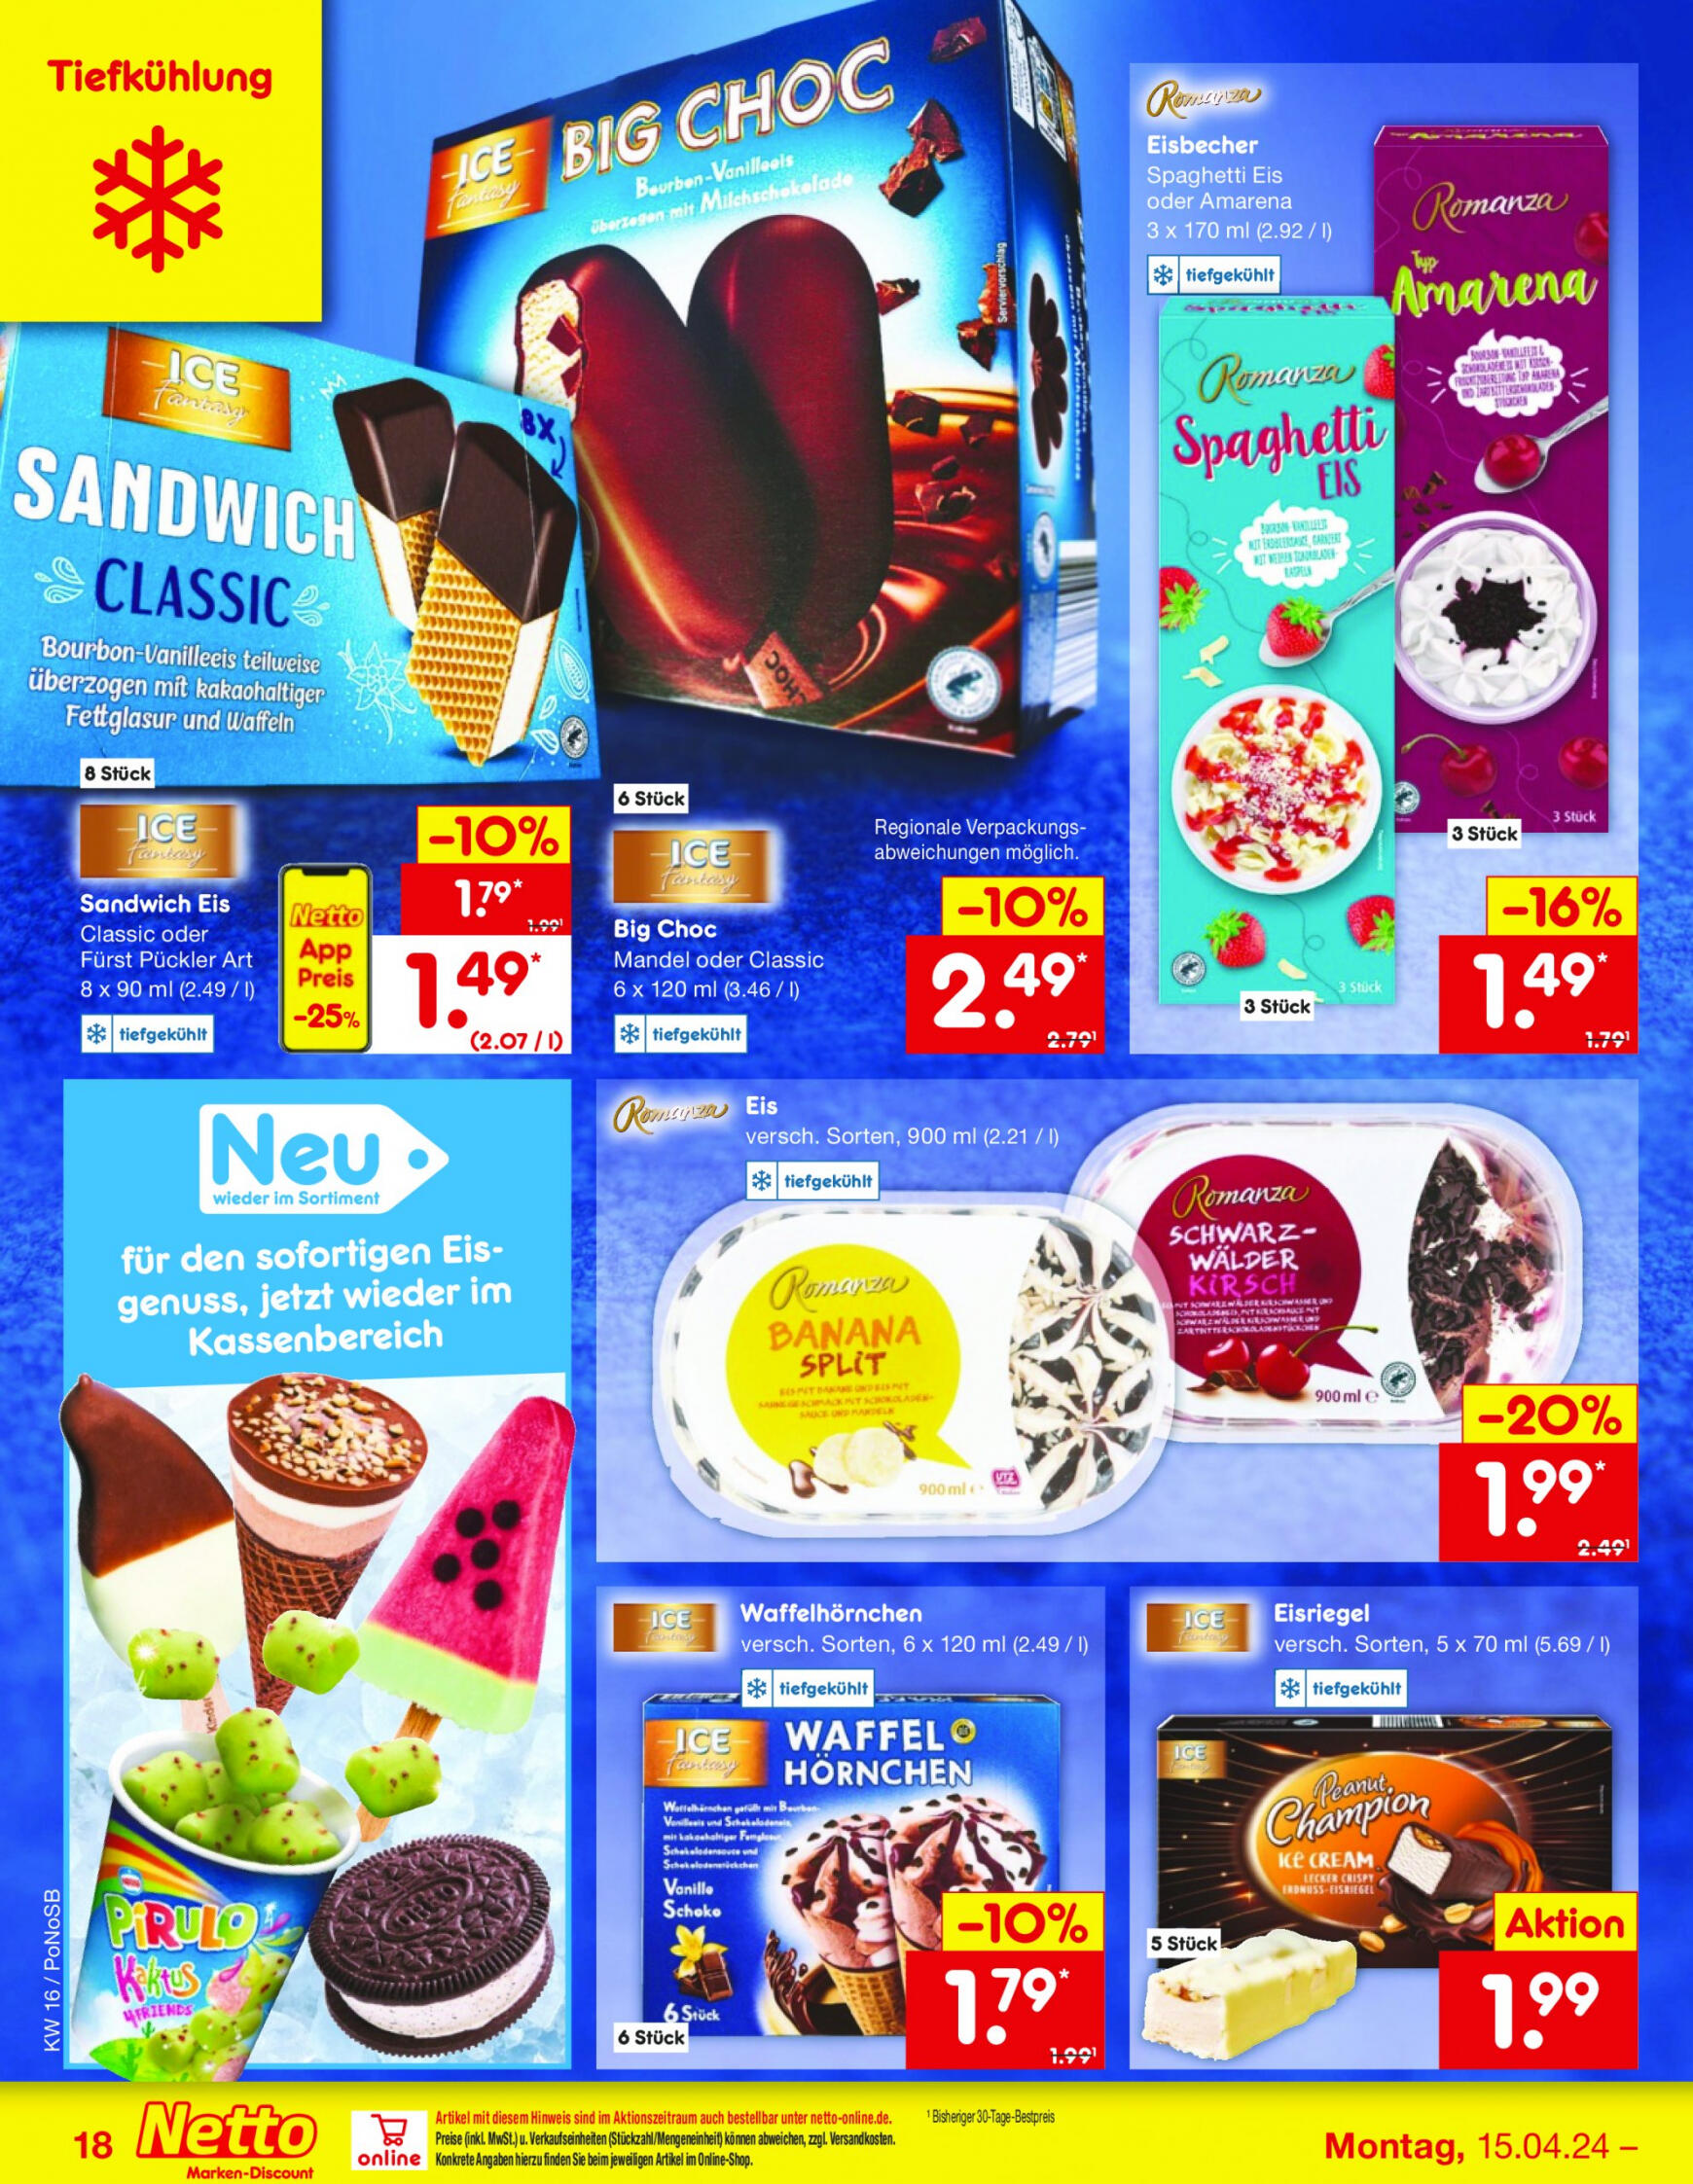 netto - Flyer Netto aktuell 15.04. - 20.04. - page: 24